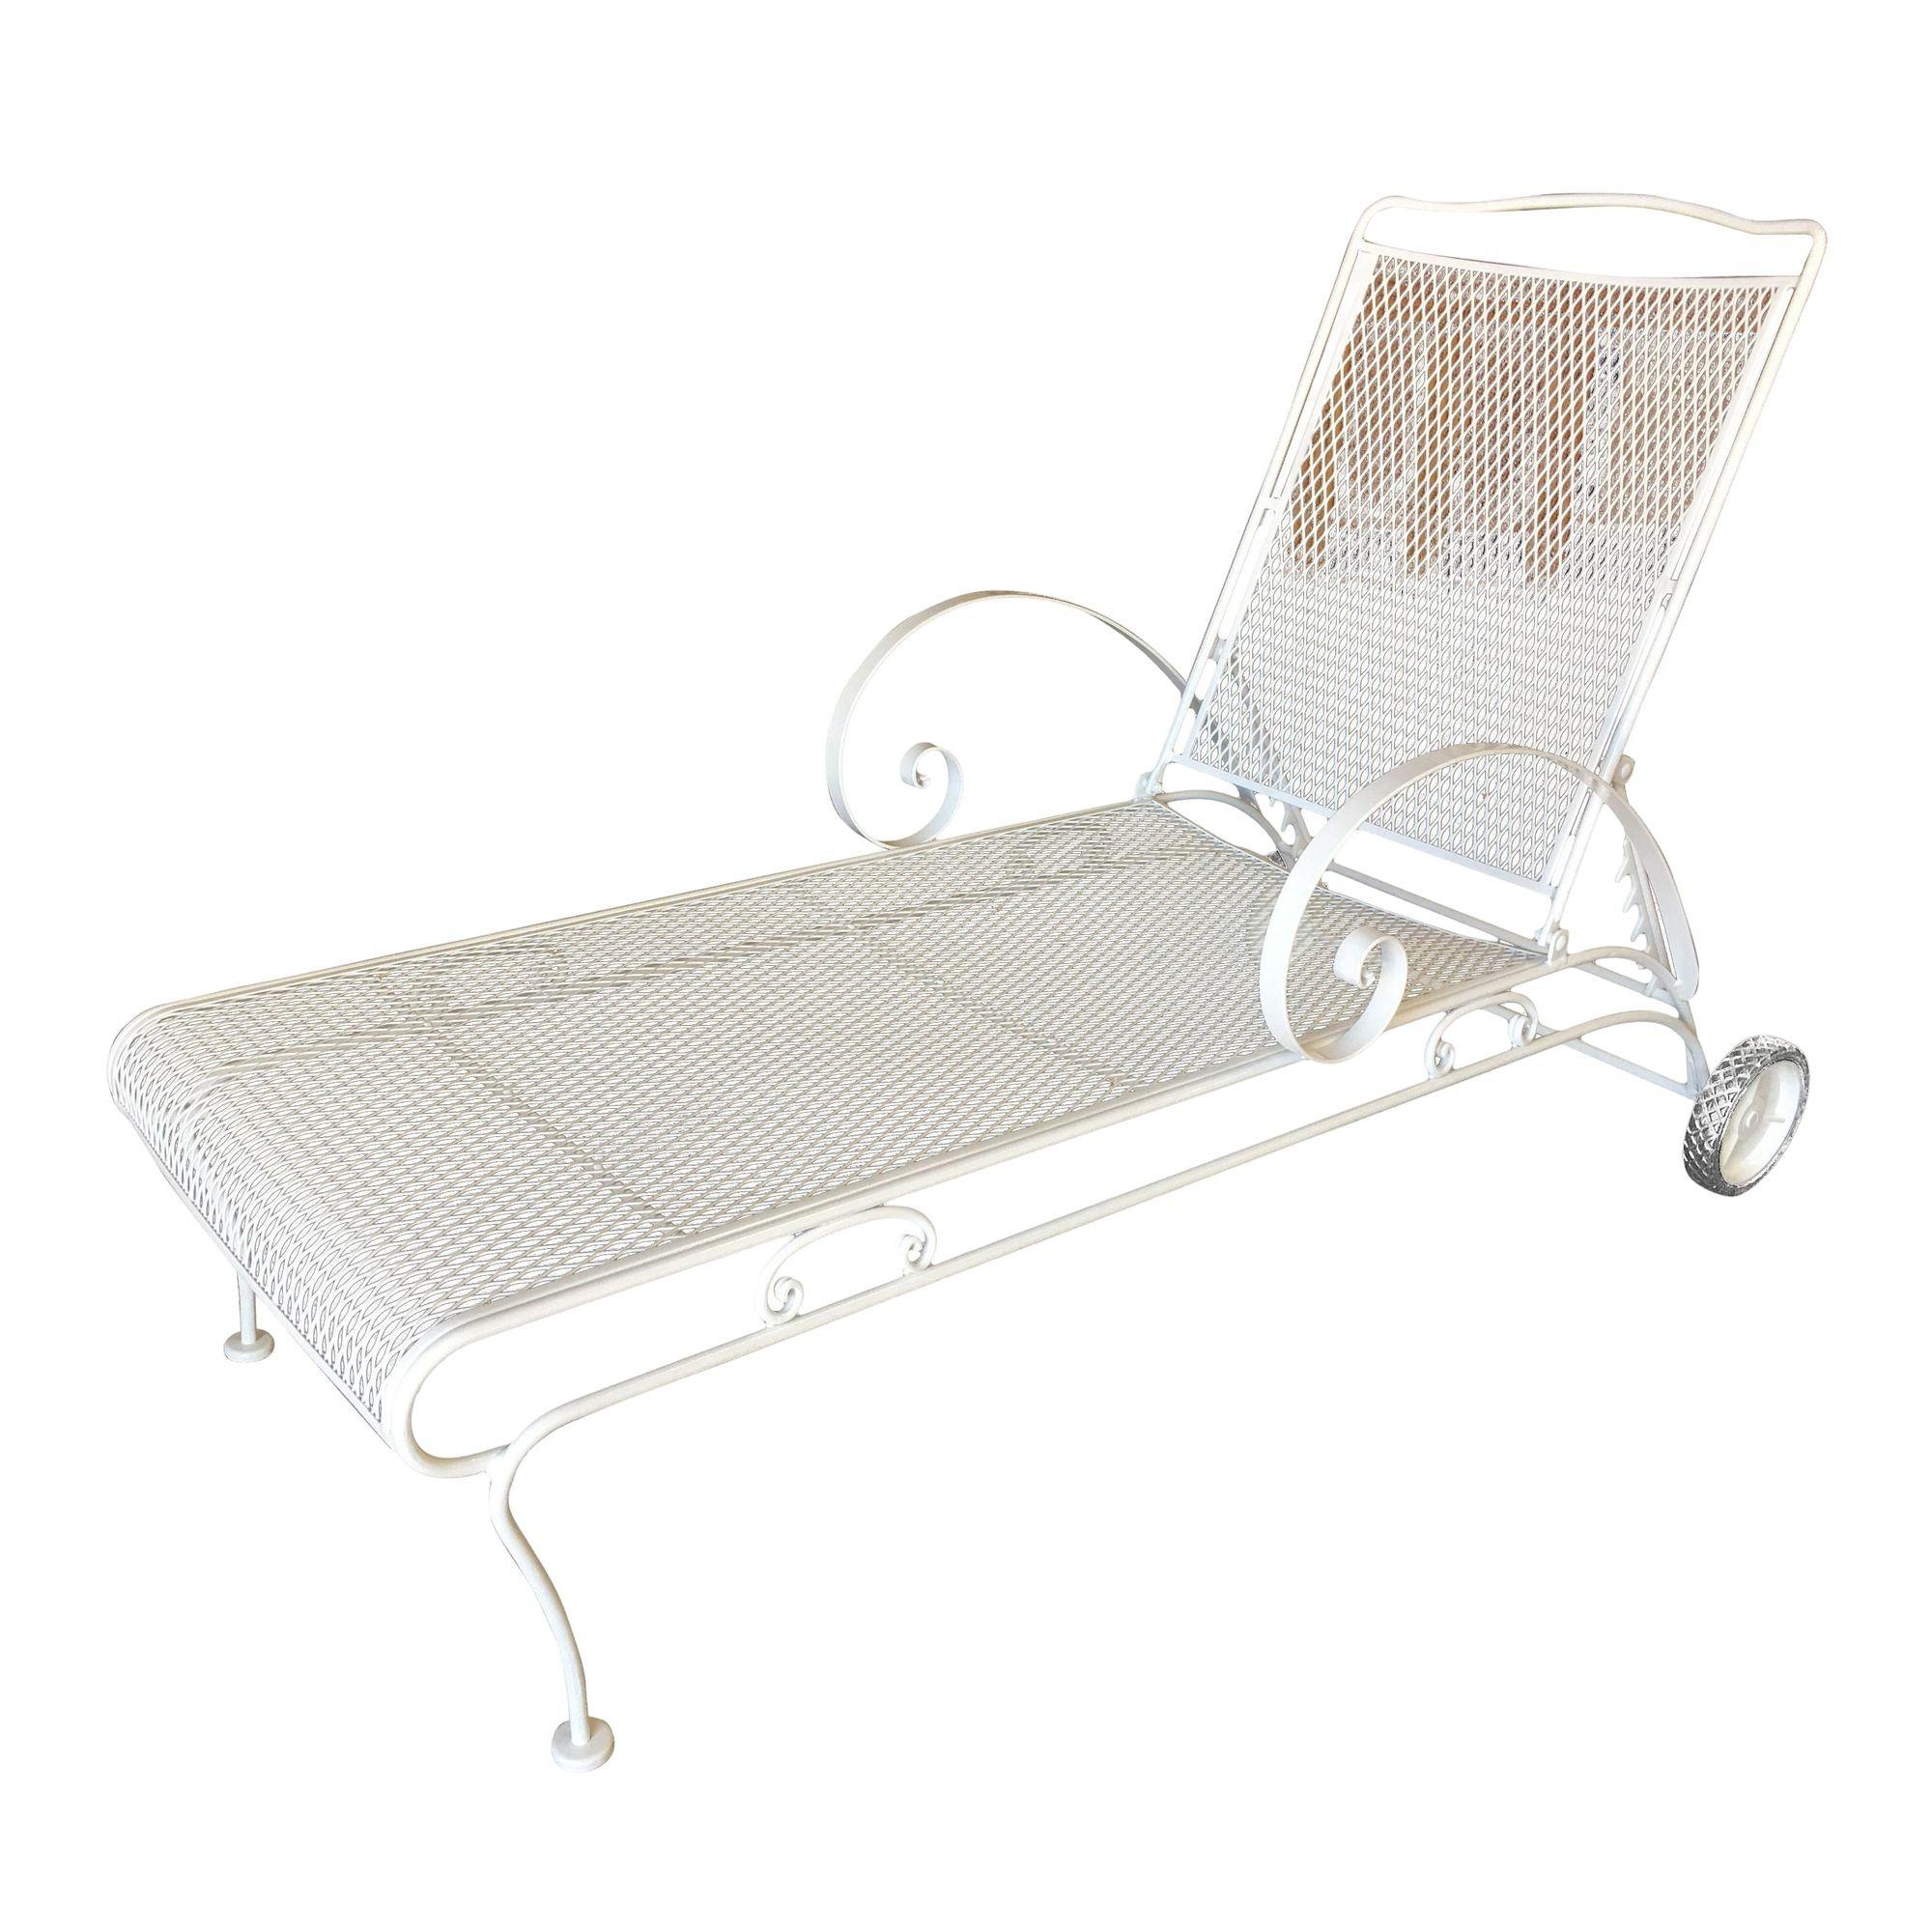 White painted iron outdoor / patio chaise lounge, produced in 1950 by the Woodard Furniture Company. This comfortable and stylish vintage chaise lounge features a fully adjustable reclining back and back wheels for easy moving with large scrolling